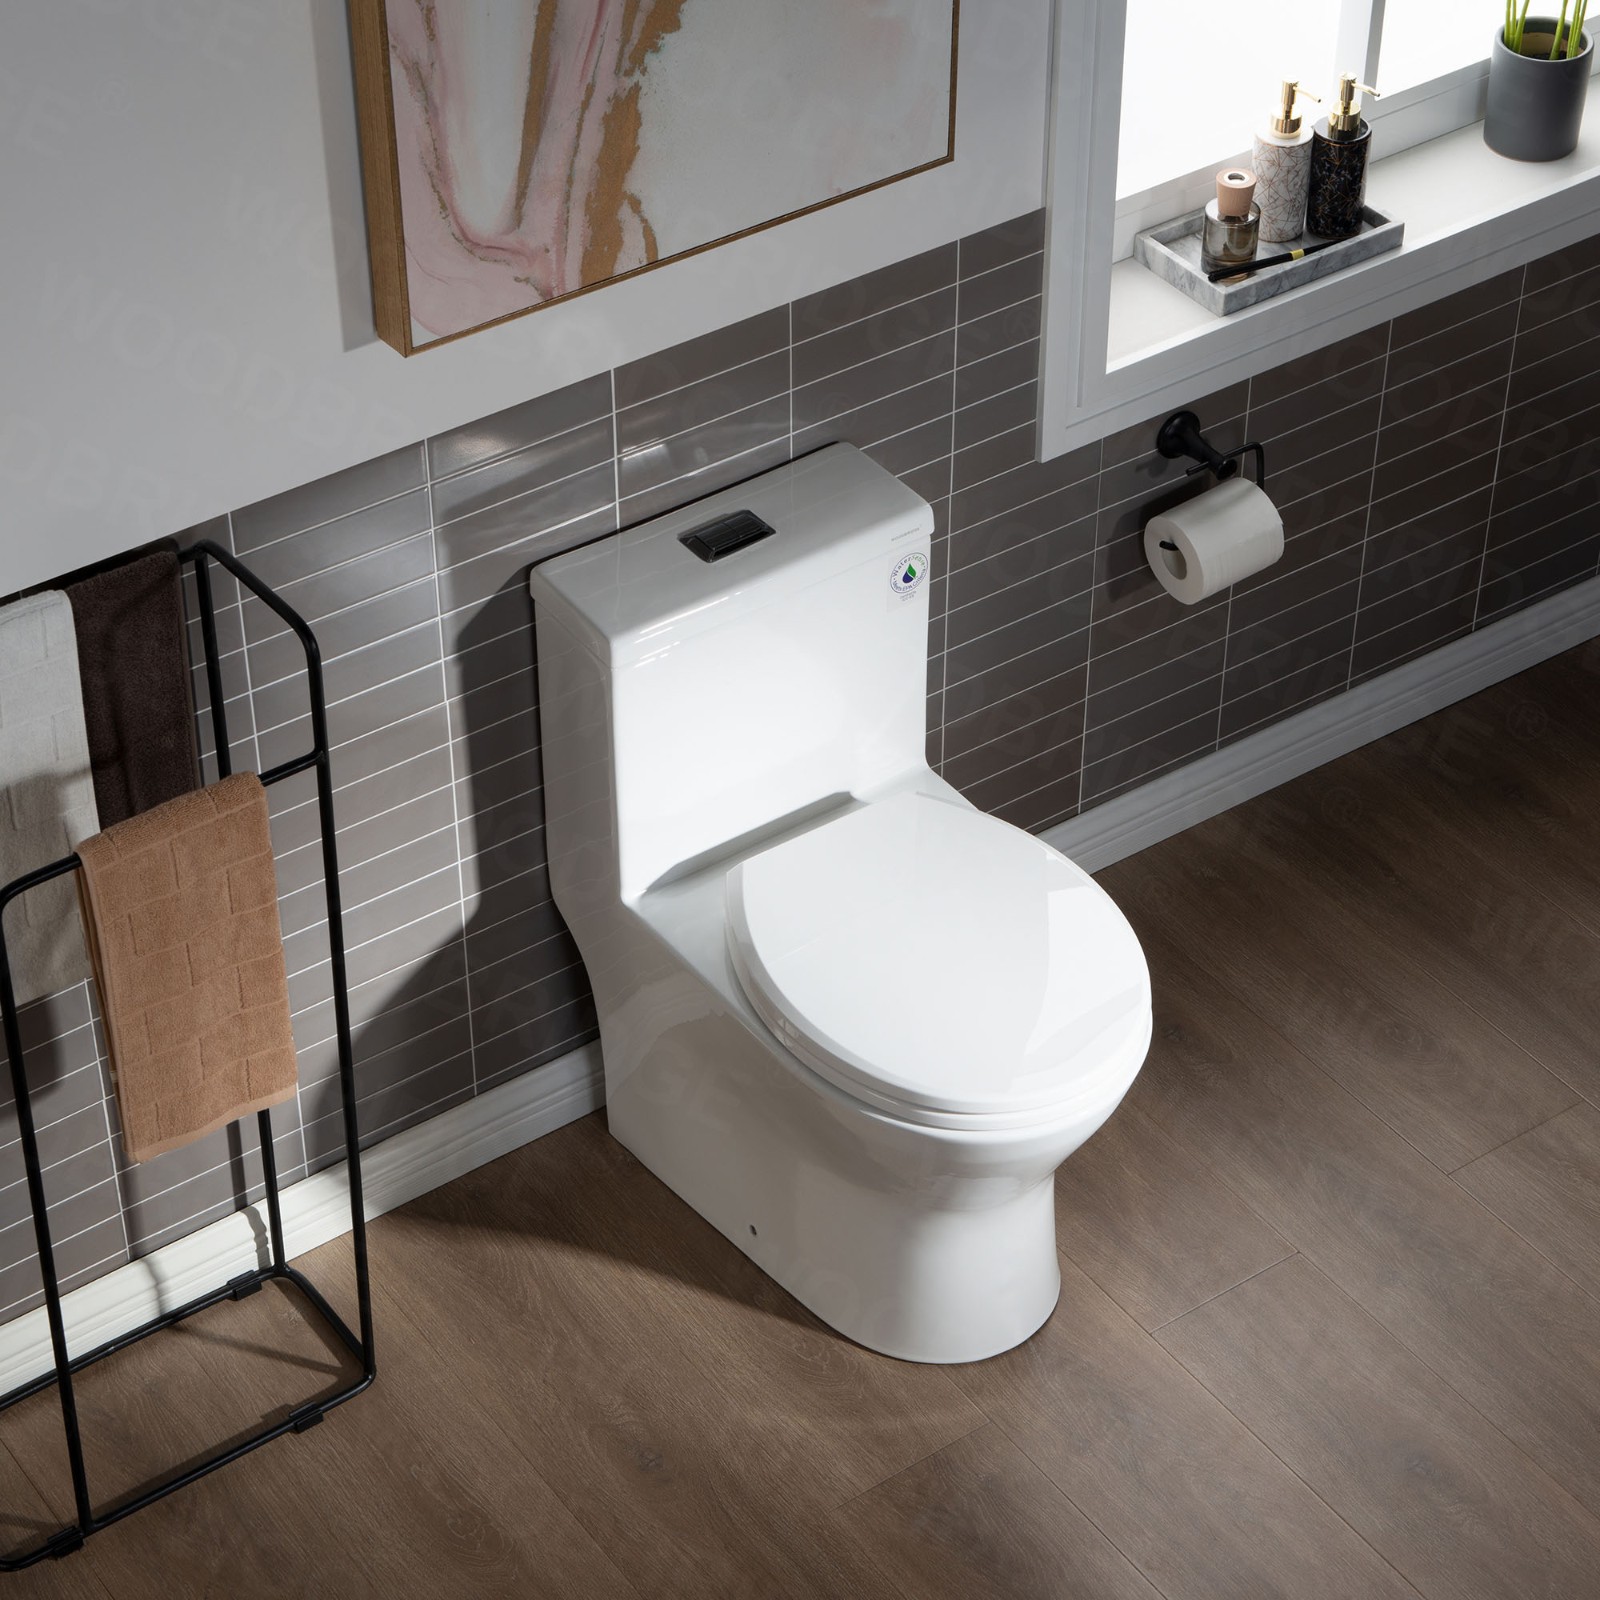  WOODBRIDGE One Piece Short Compact Bathroom Tiny Mini Commode Water Closet Dual Flush Concealed Trapway, Oil Rubbed Bronze Button B0500-ORB, White_5656